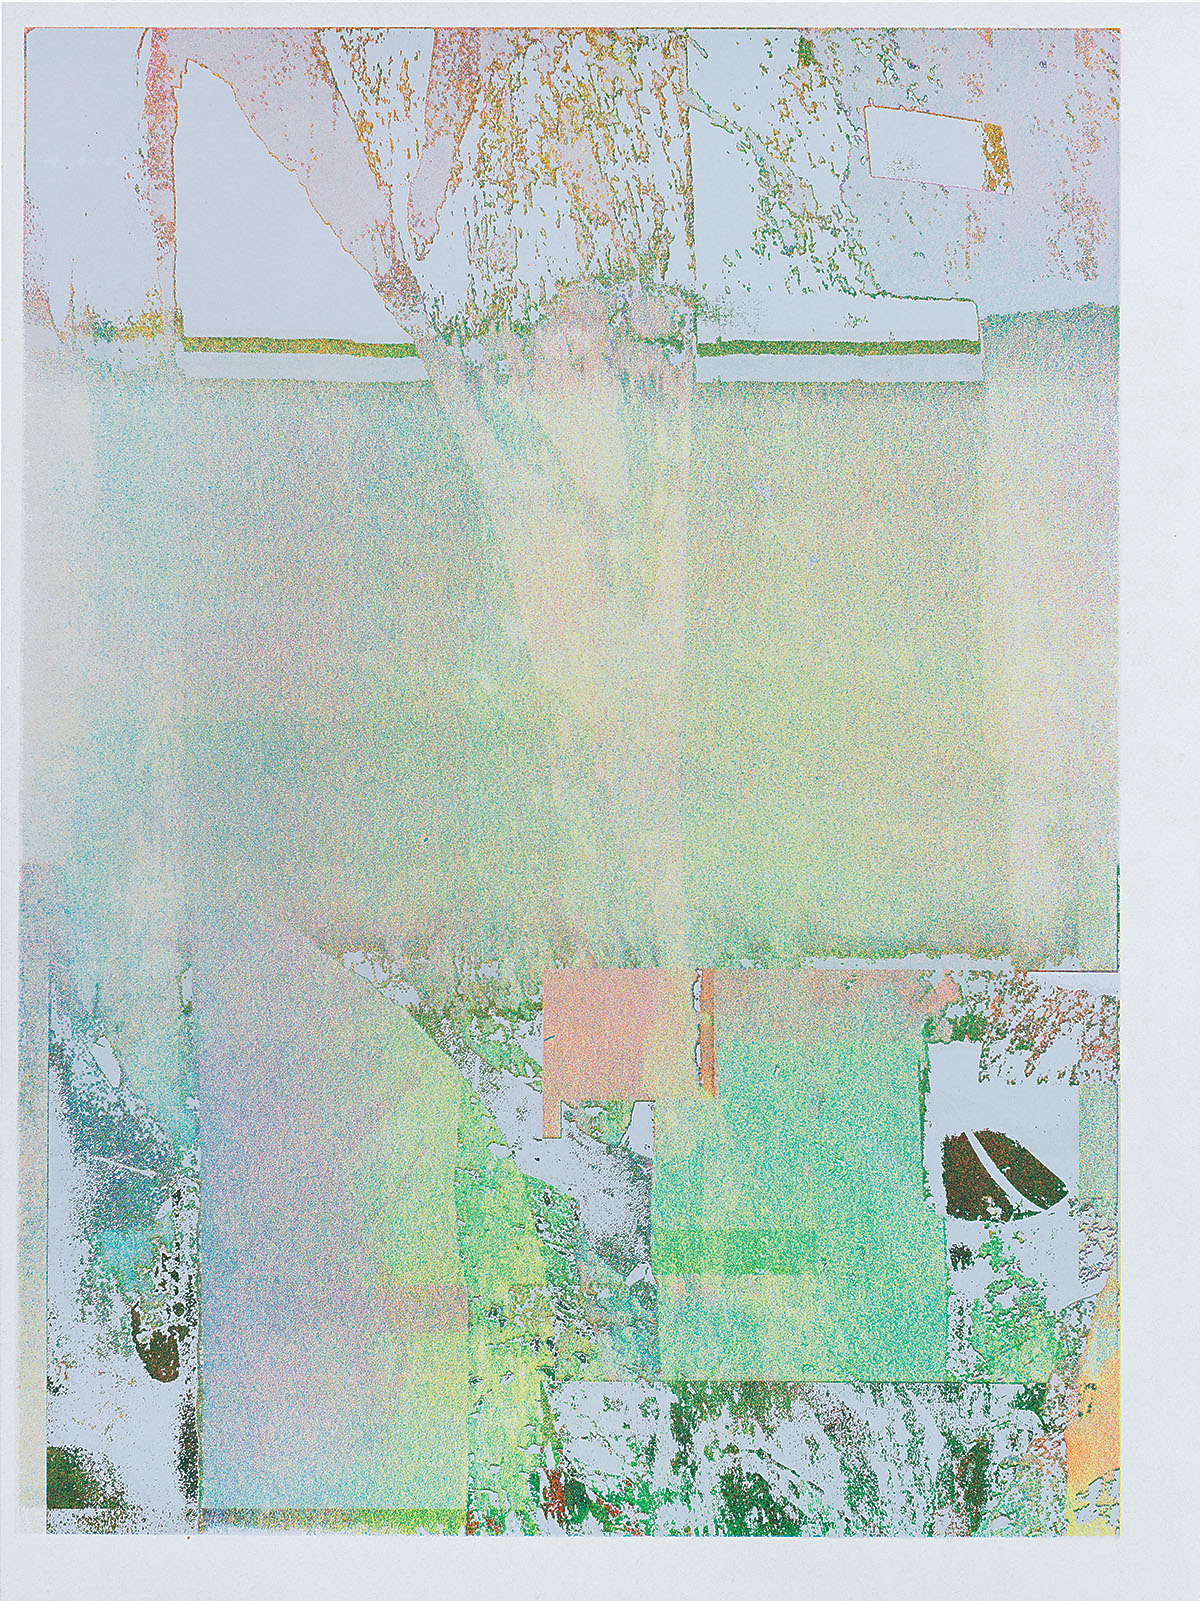 <p>Shallow Perspective<br />
by Sonnenzimmer<br />
2021<br />
6-color screen print with UV spot<br />
varnish<br />
18 × 24 inches<br />
edition of 38<br />
—<br />
ID: A hazy green tinted abstraction, with<br />
grey organic shapes hovering just<br />
above an atmospheric colorfield. The<br />
barely visible colorfield image<br />
resembles an aerial landscape and and<br />
the flat grey shapes resembled cloud<br />
systems.</p>